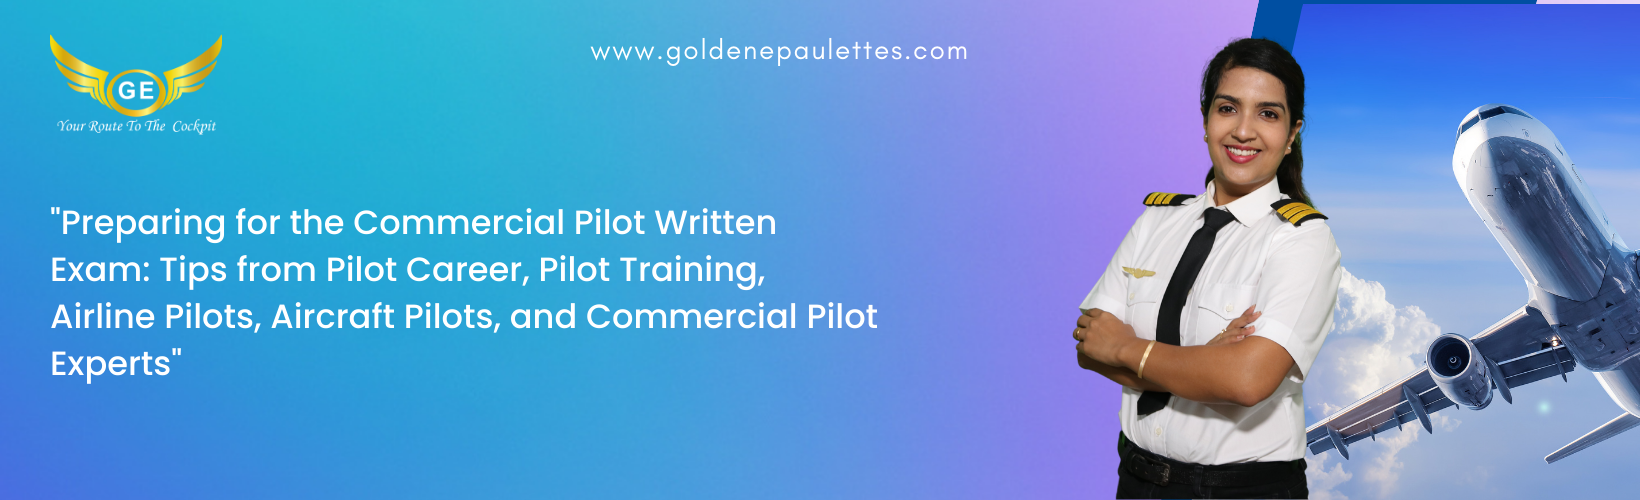 Finding the Right Study Materials for the Commercial Pilot Written Exam